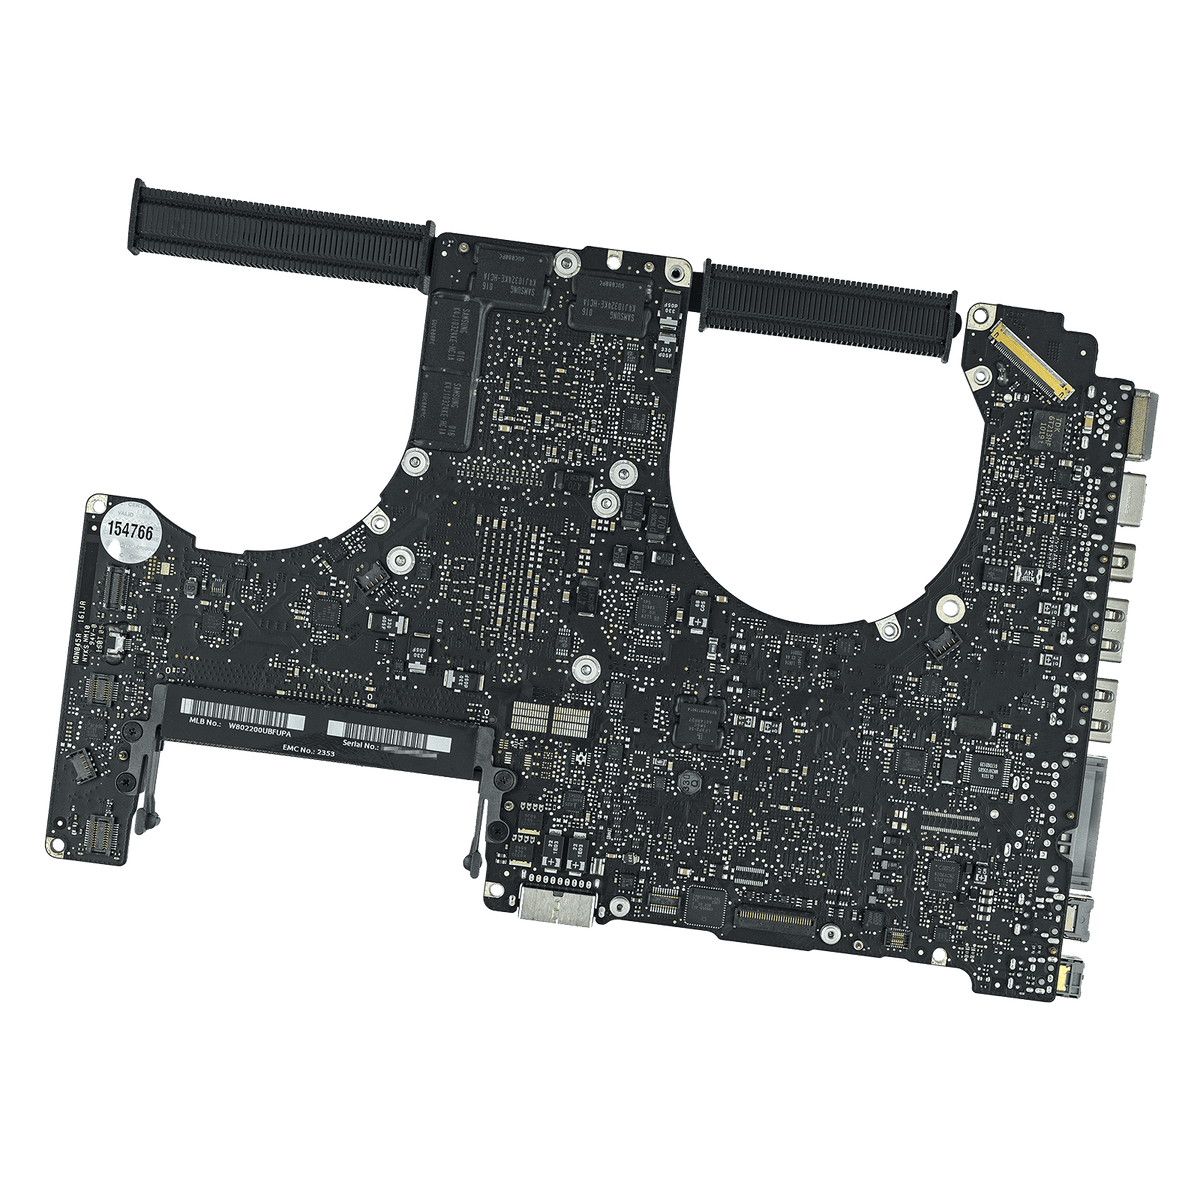 MOTHERBOARD FOR MACBOOK PRO 15" A1286 (MID 2010)